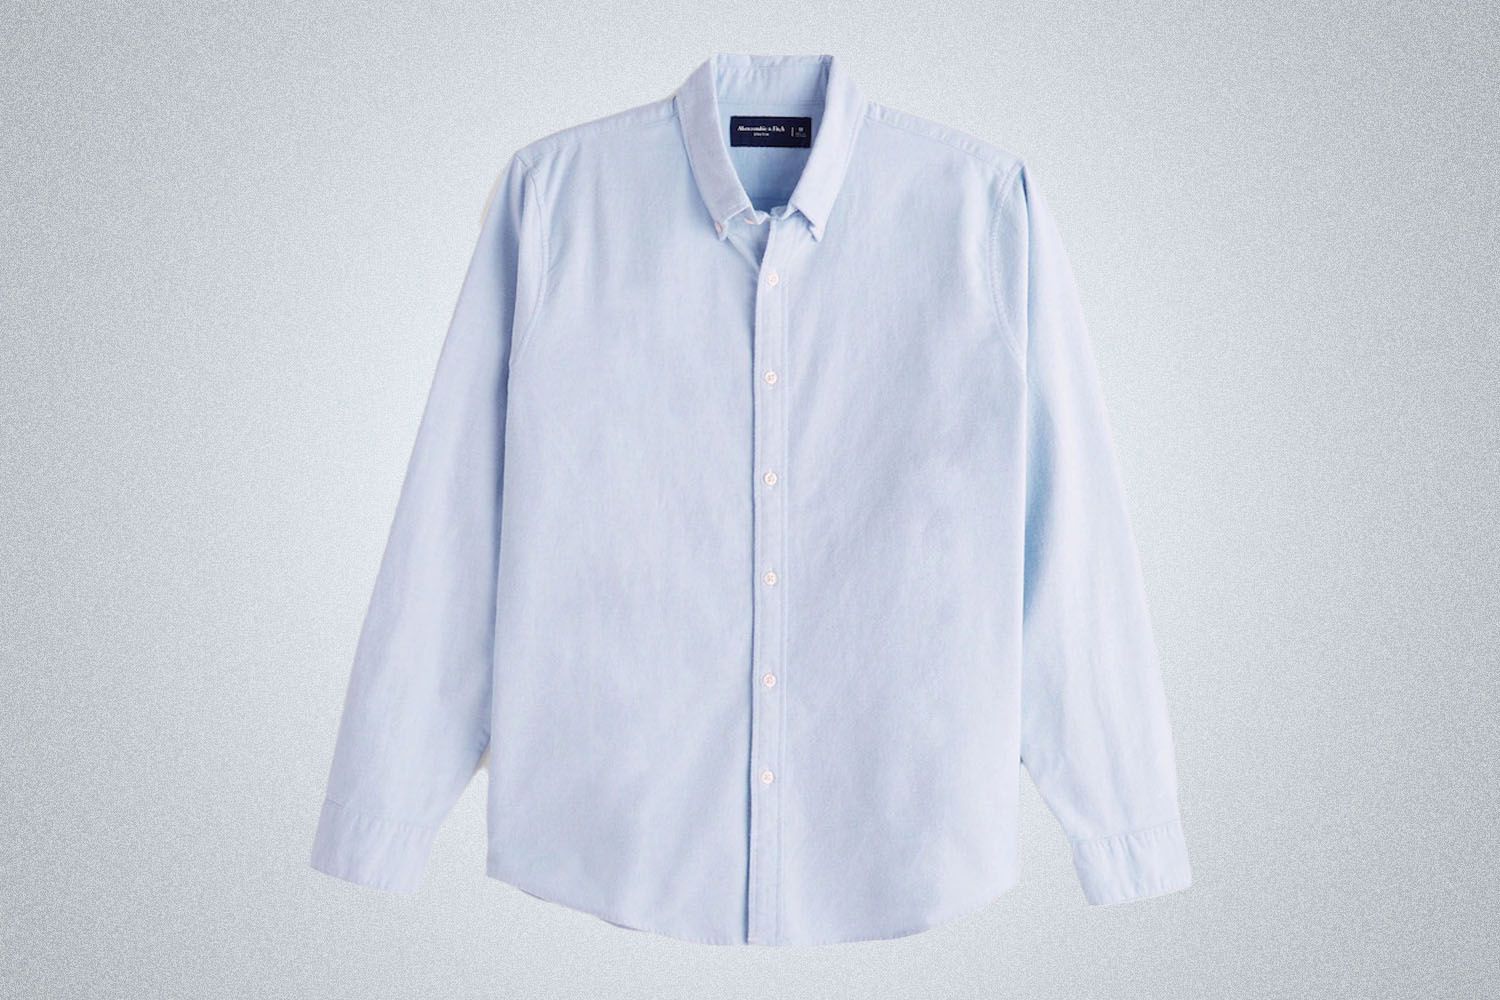 a light blue summery Abercrombie & Fitch shirt on a grey background